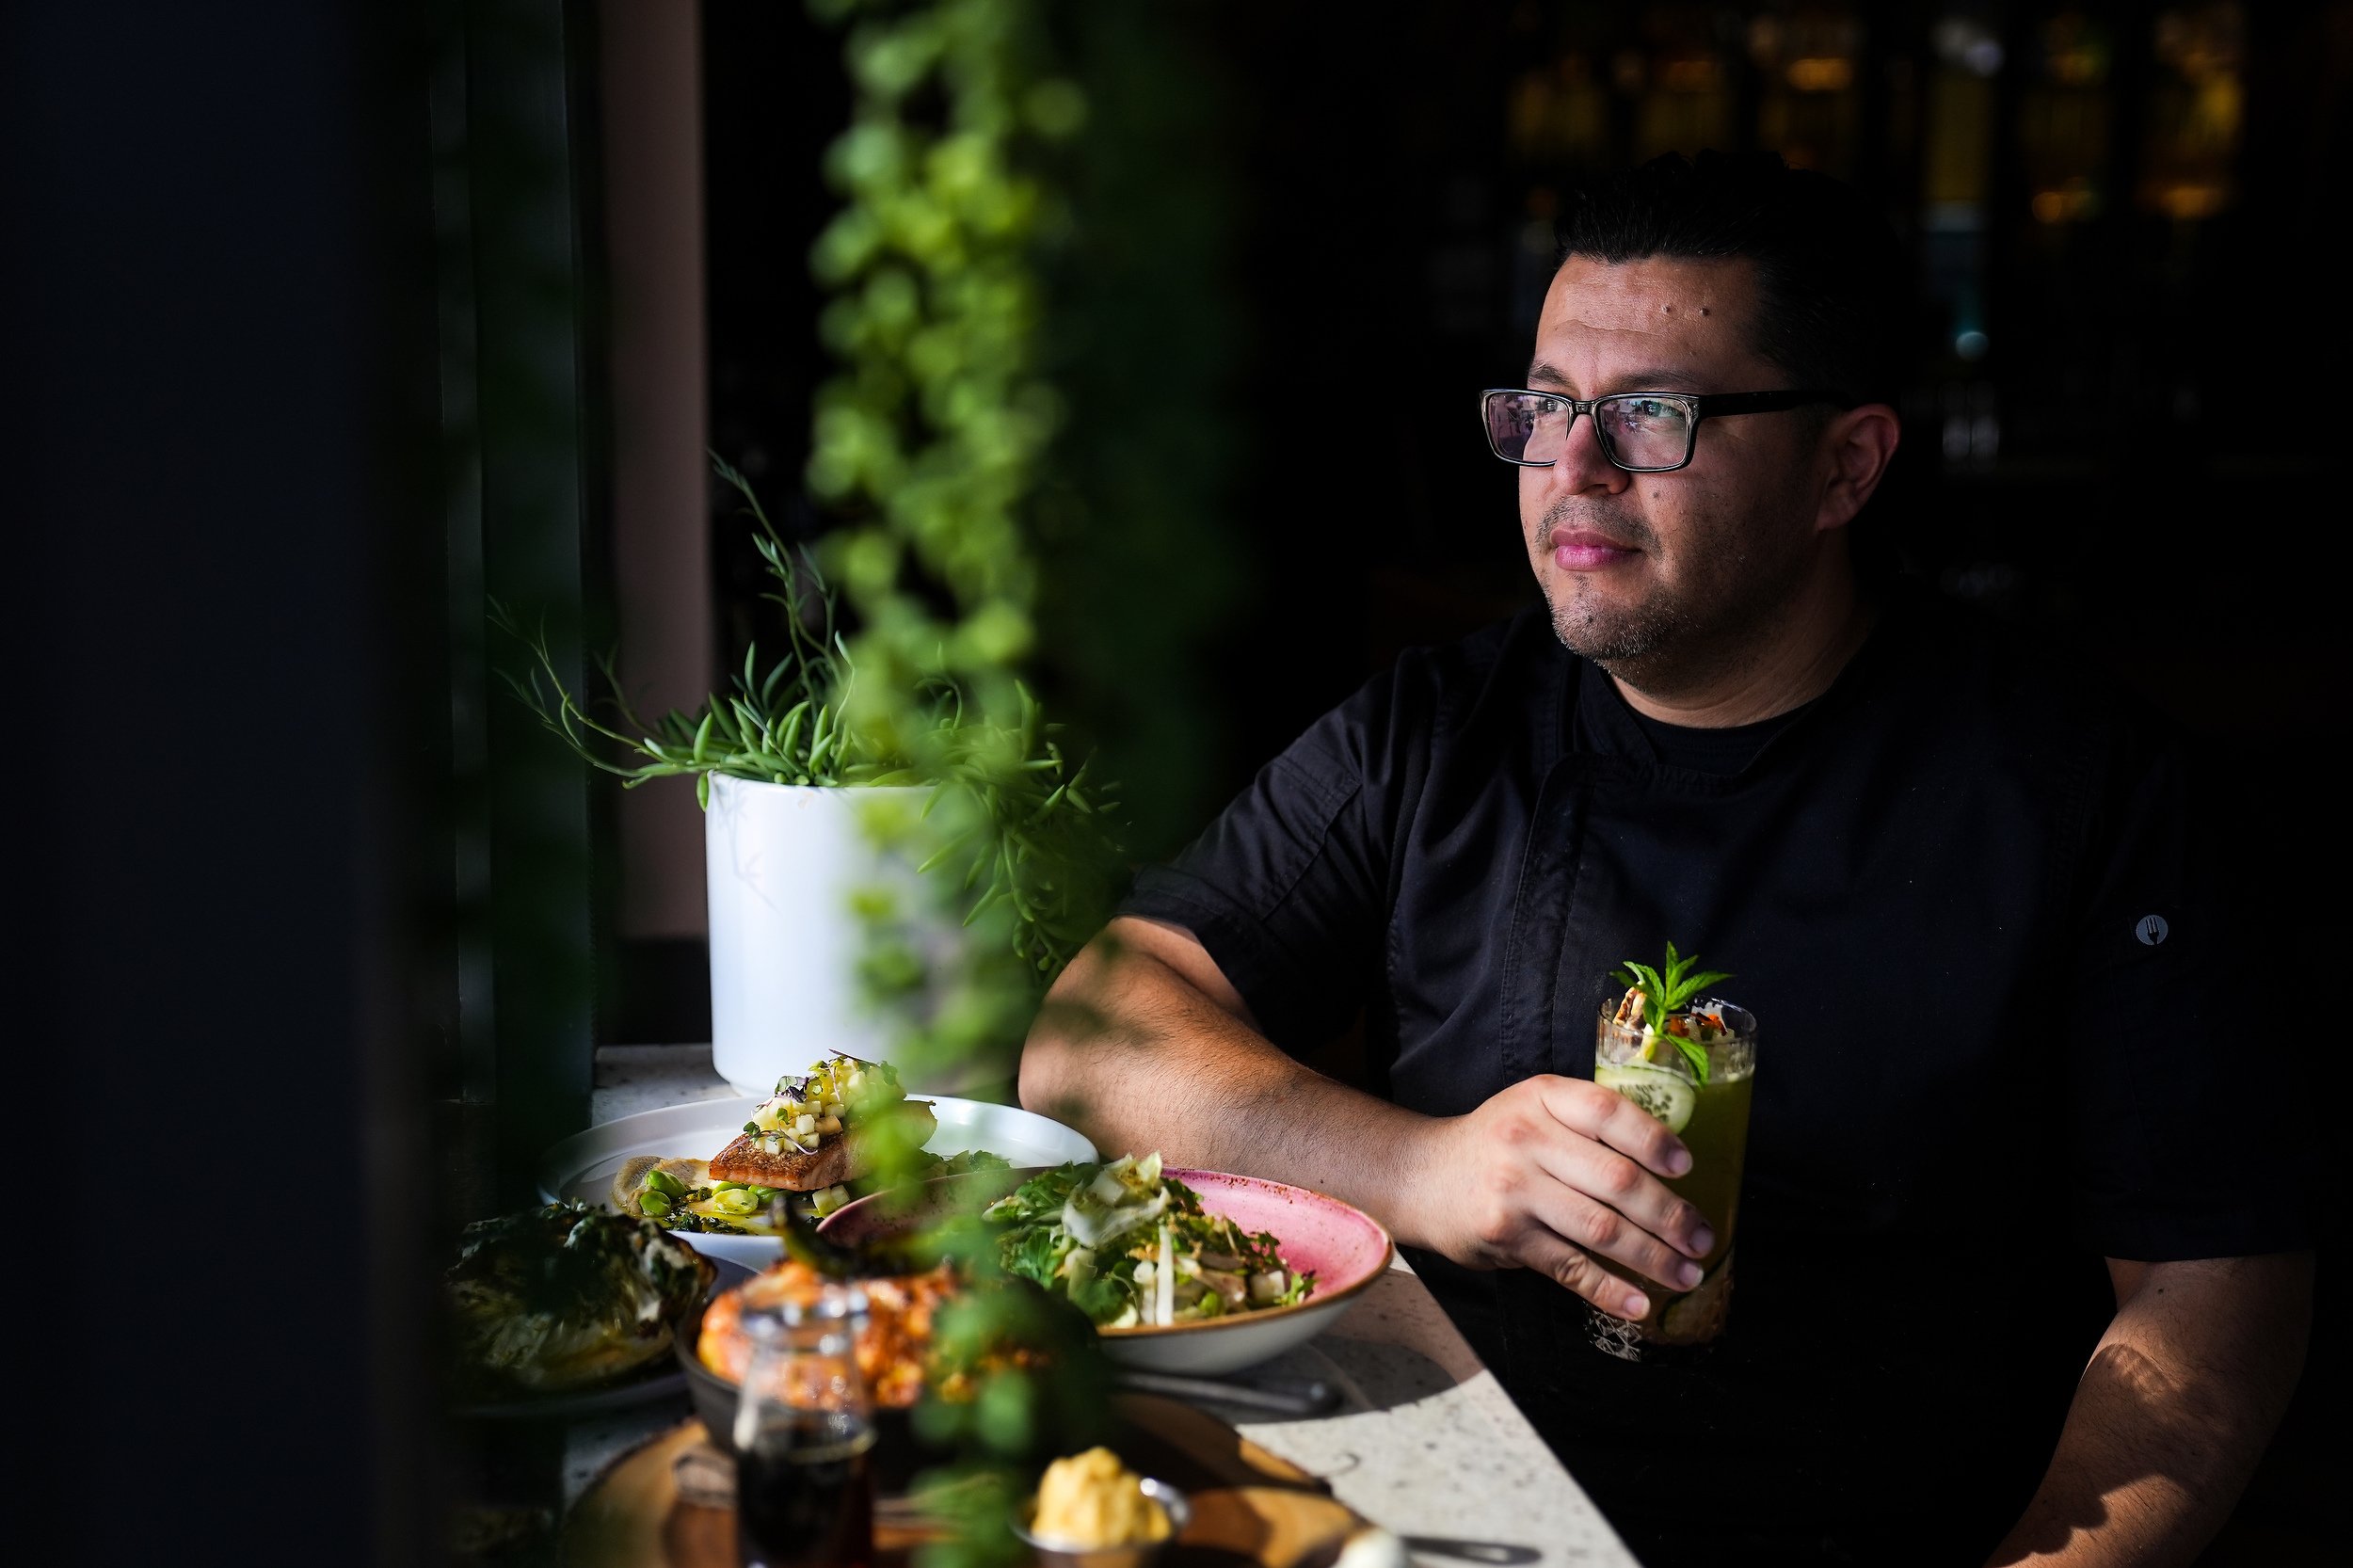  Saul Velazquez, Executive Chef at Sante, poses for a portrait with an assortment of dishes on Thursday, May 5, 2022, in Scottsdale. “We want you to eat well, but still feel good,”  Velazquez said. The chef hopes his restaurant brings a California-es